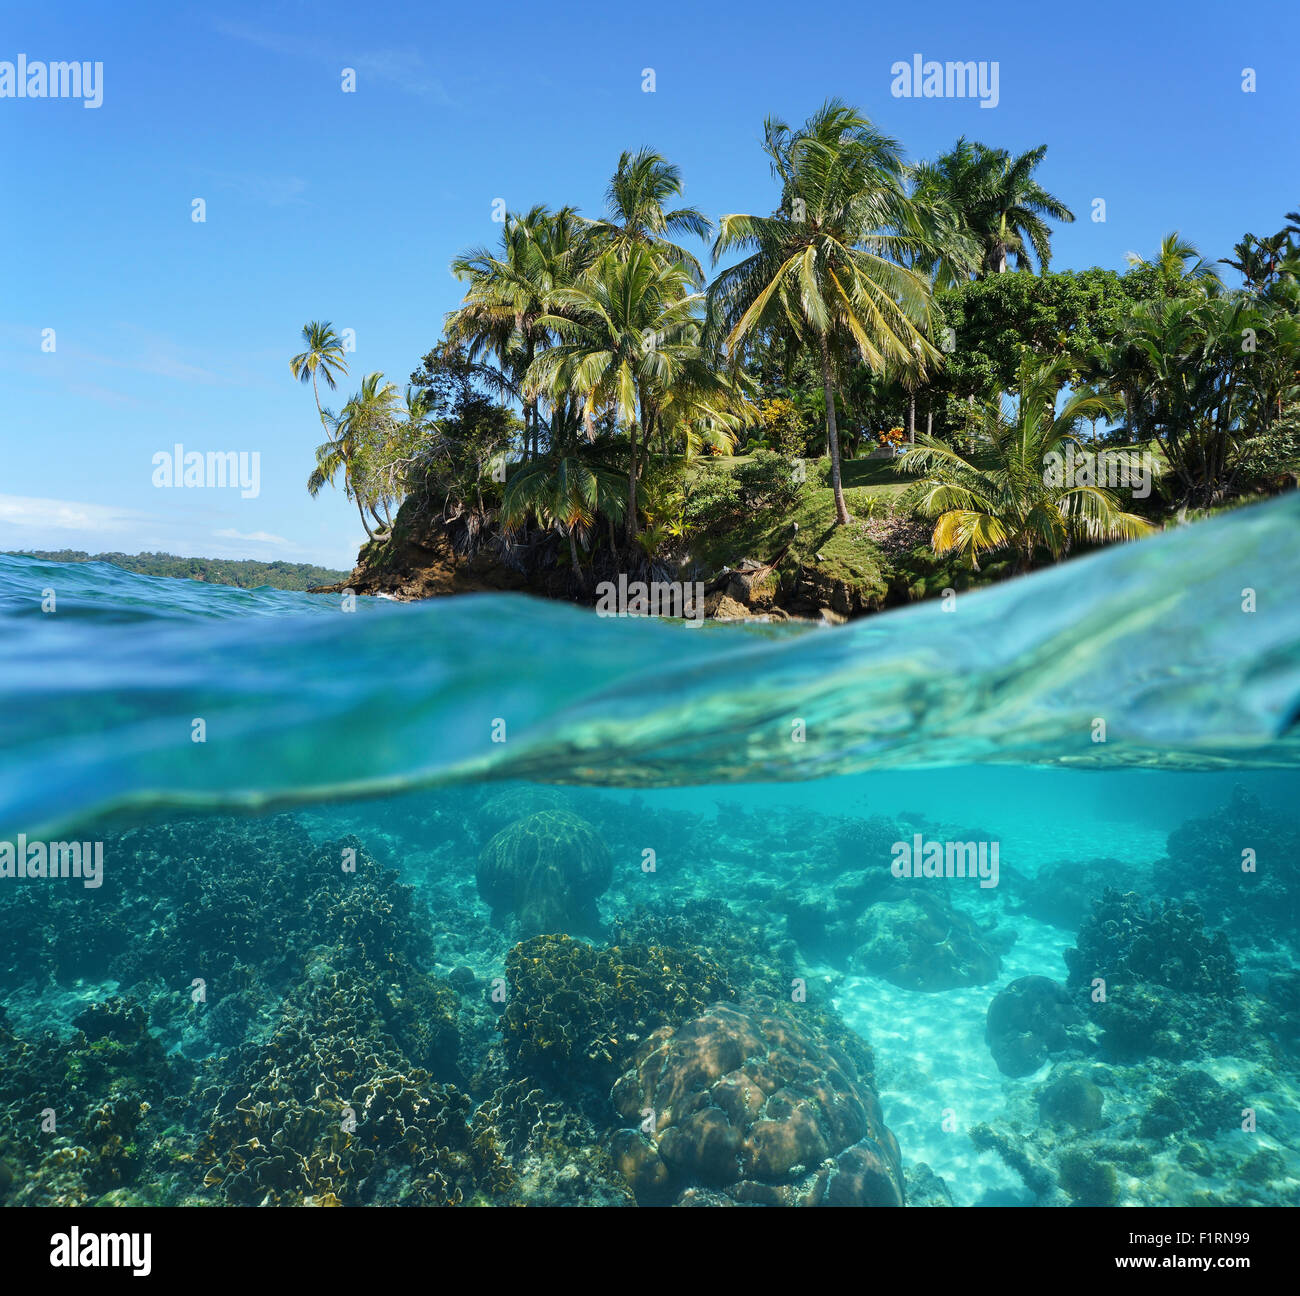 Tropical island and corals underwater split by waterline, Caribbean sea Stock Photo